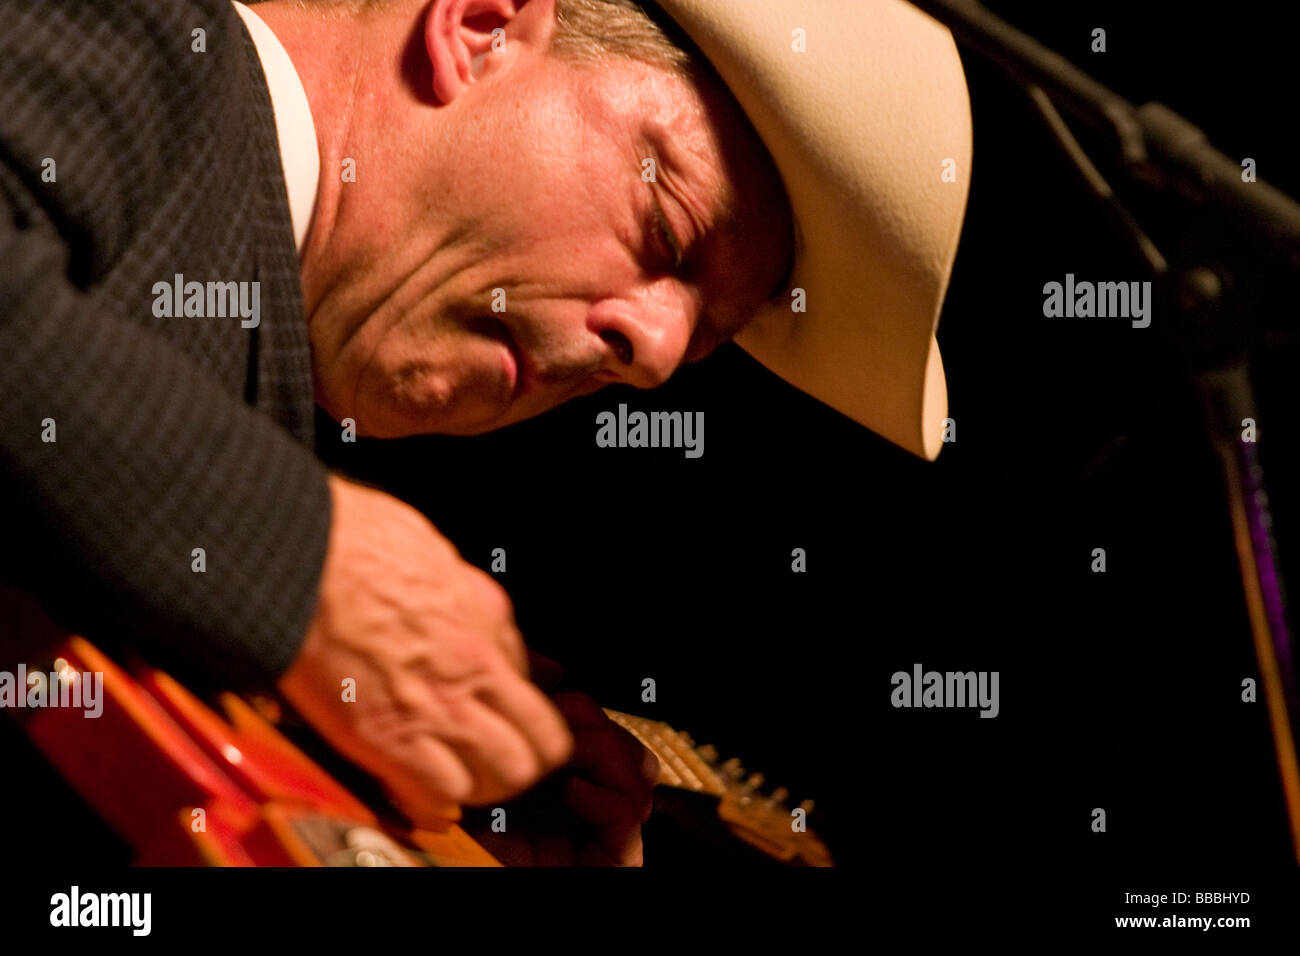 Download preview image - junior-brown-a-popular-steel-guitar-player-writes-and-plays-country-BBBHYD